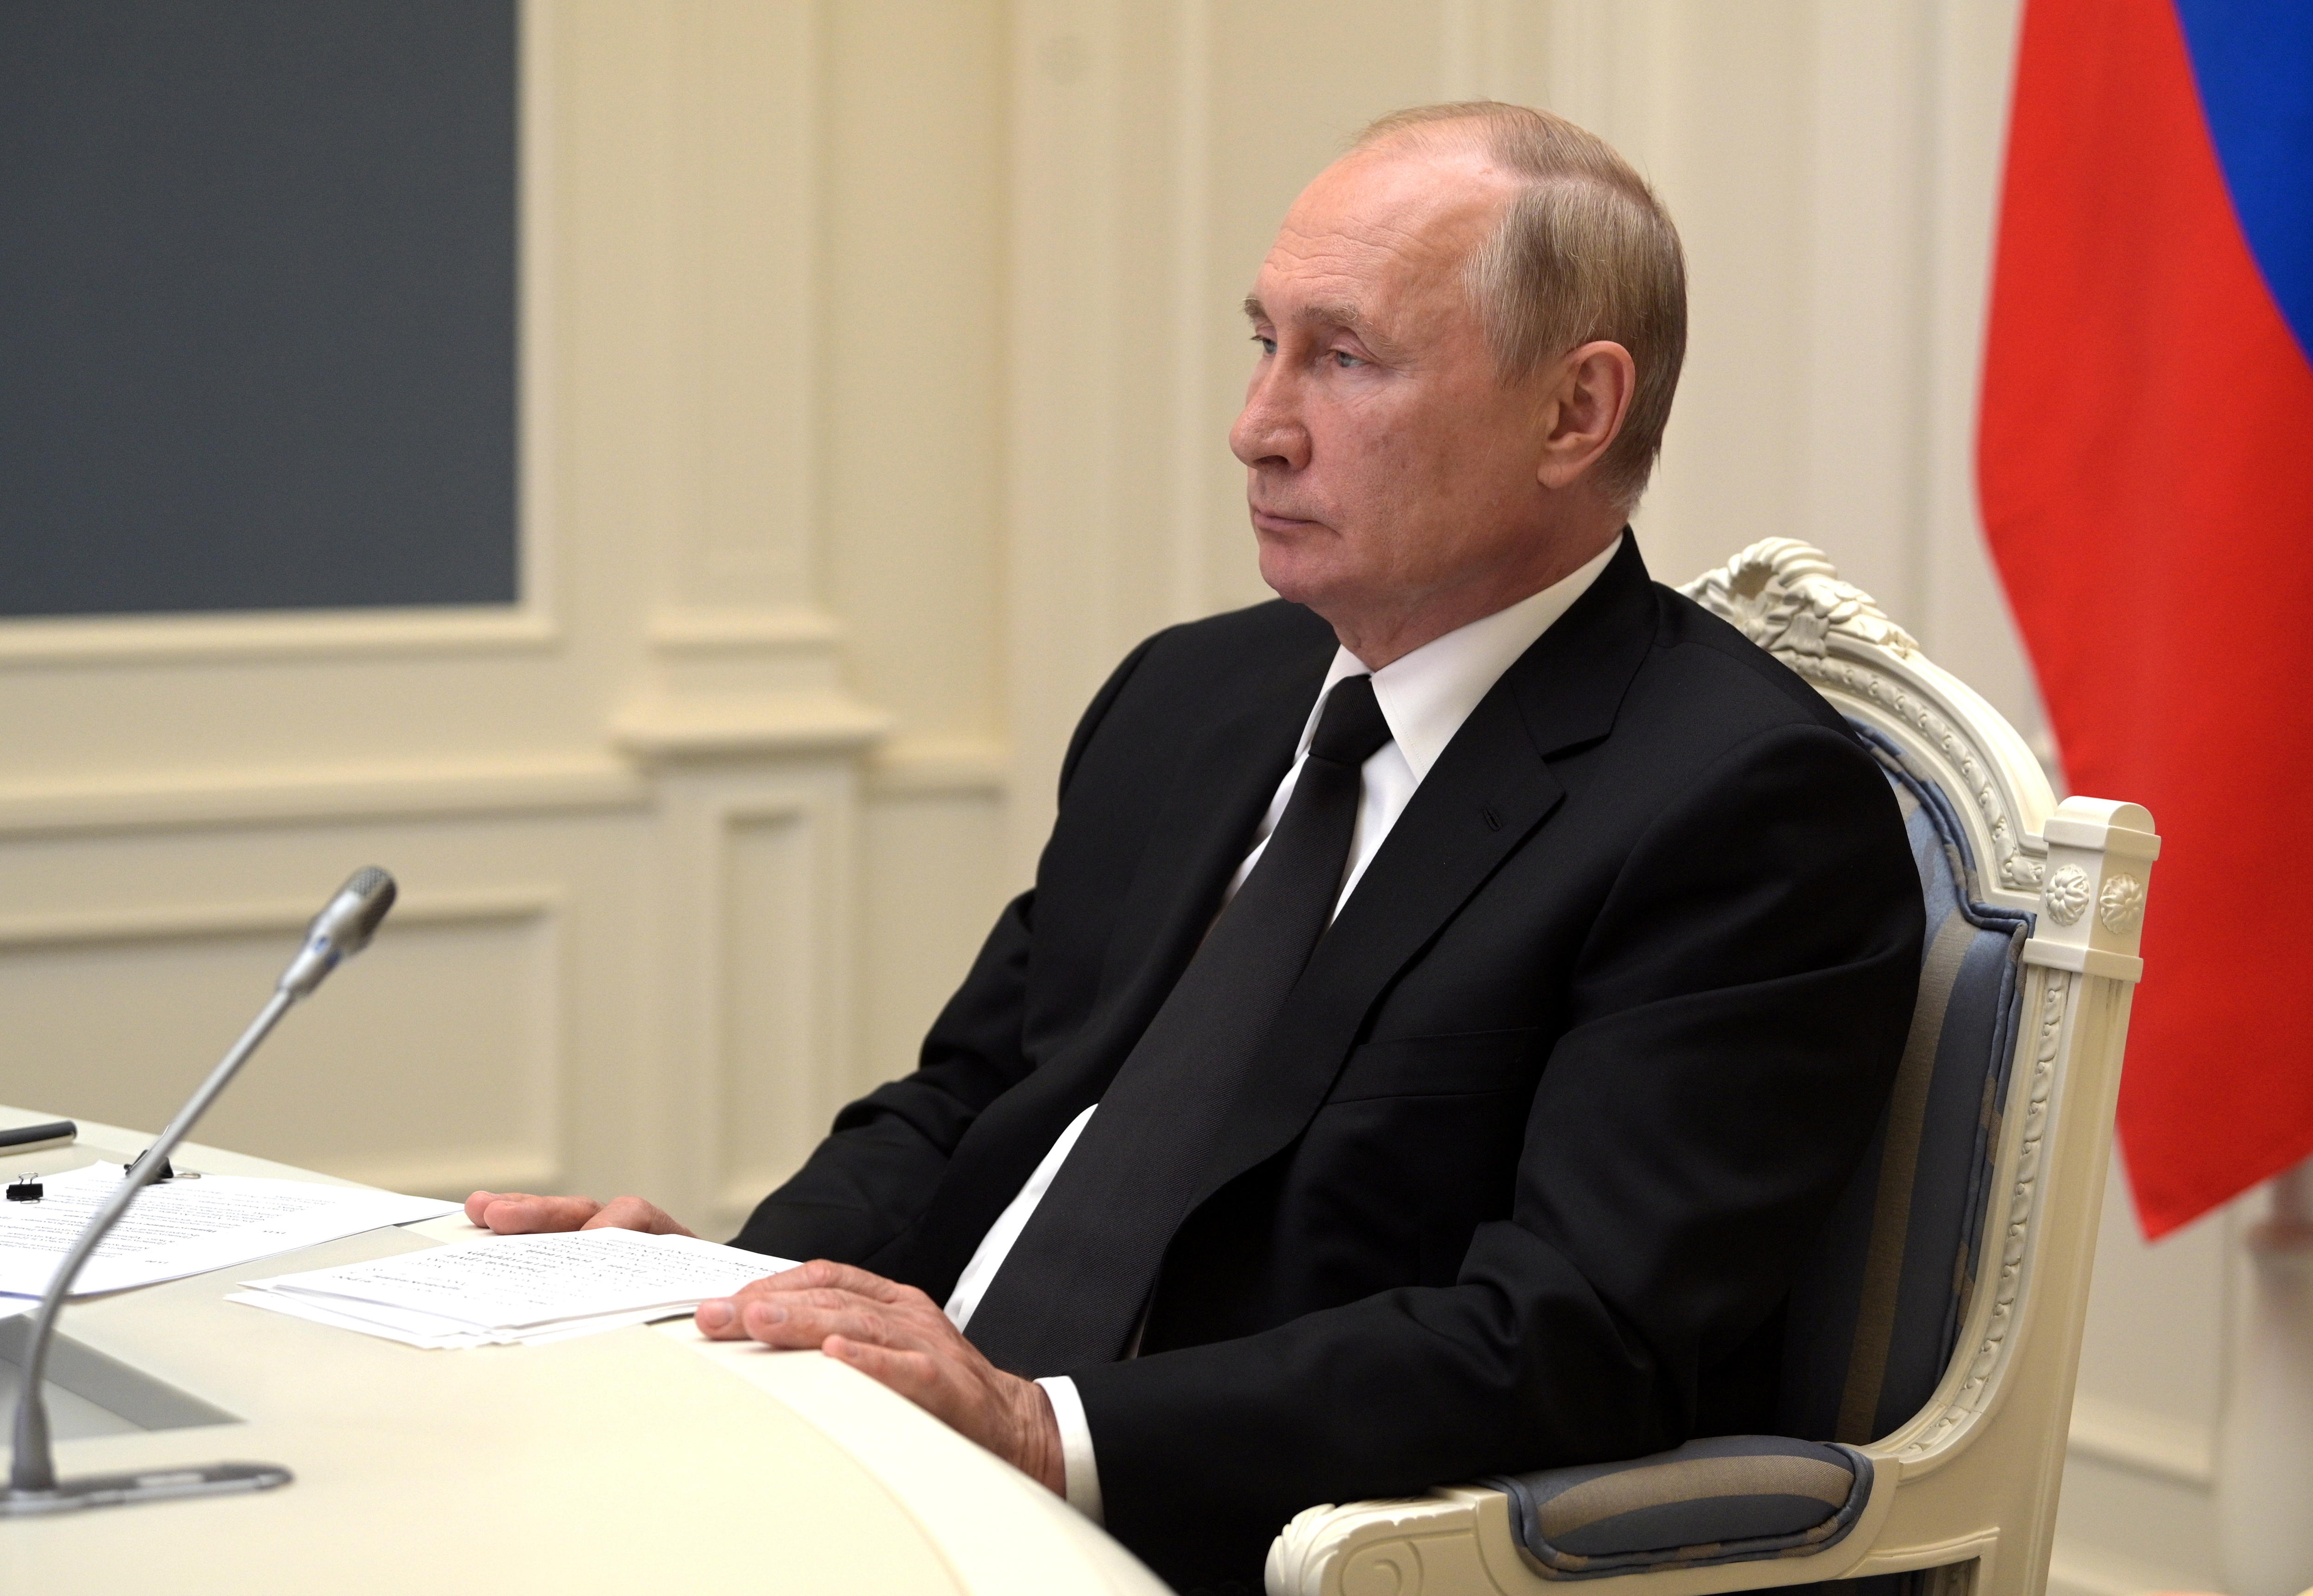 Russian President Vladimir Putin is pictured sitting at a desk, wearing a black suit and tie. Behind him is the Russian flag.